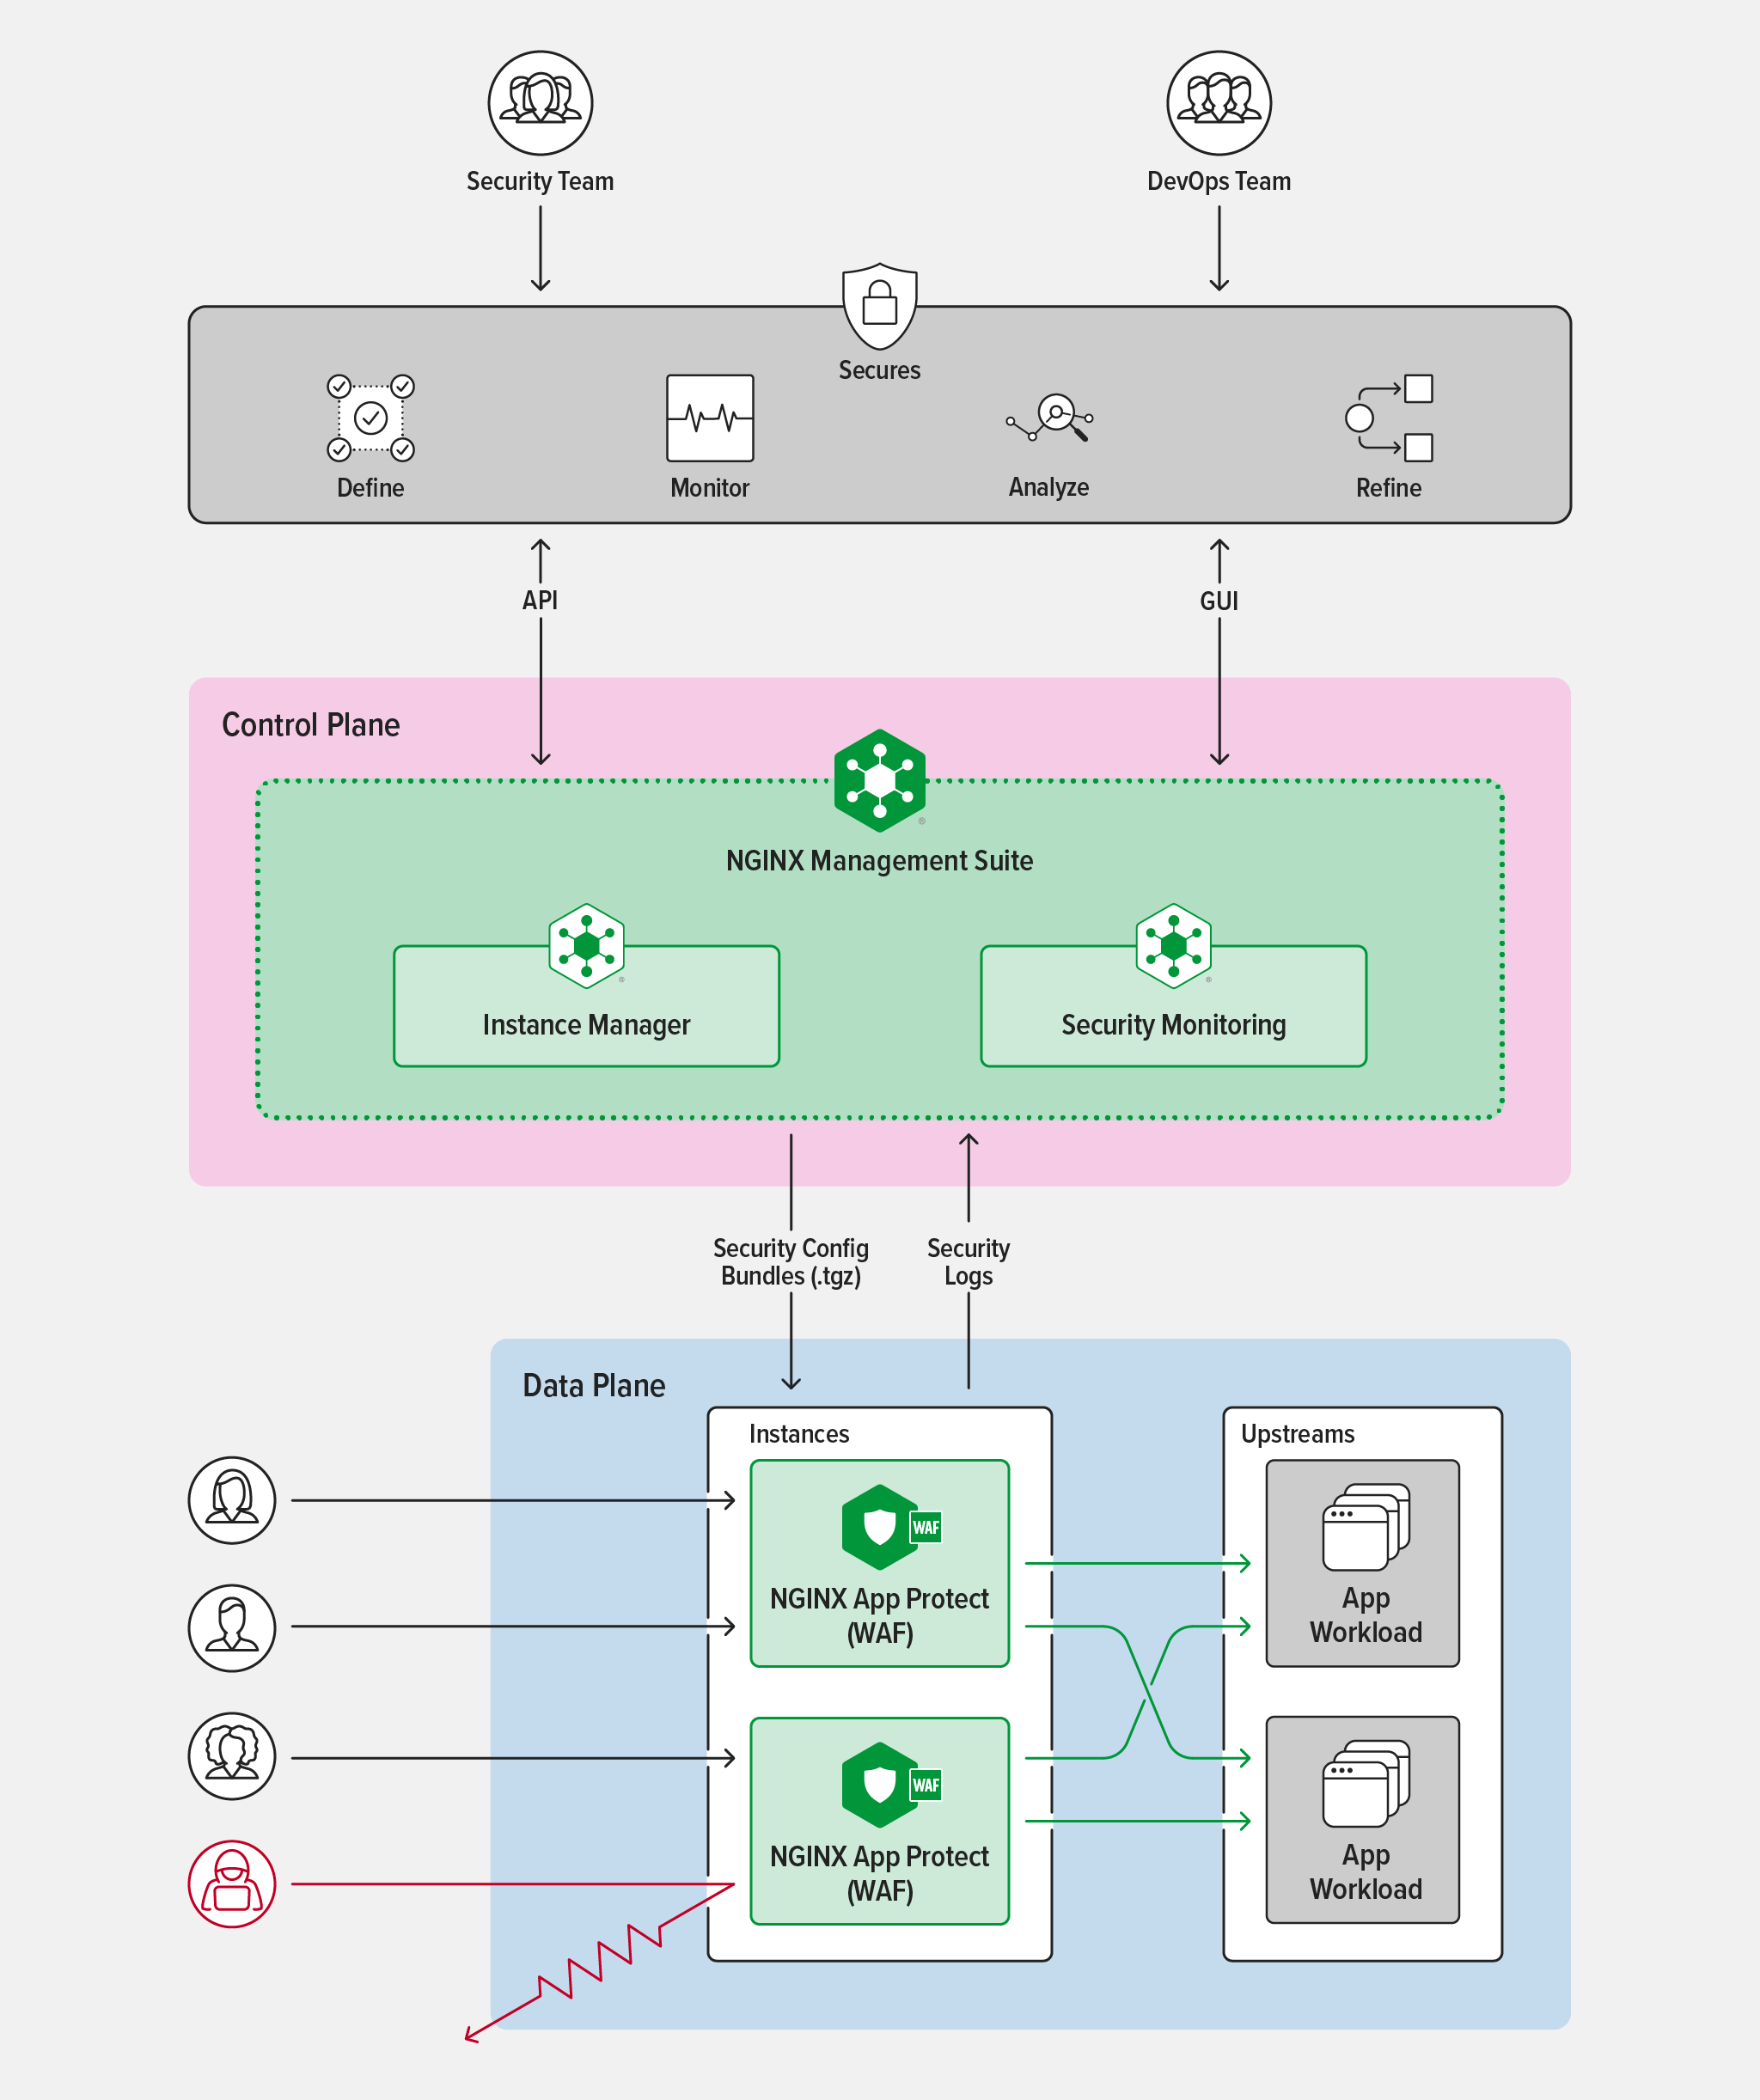 A diagram showing the architecture of the NGINX Management Suite with NGINX App Protect solution